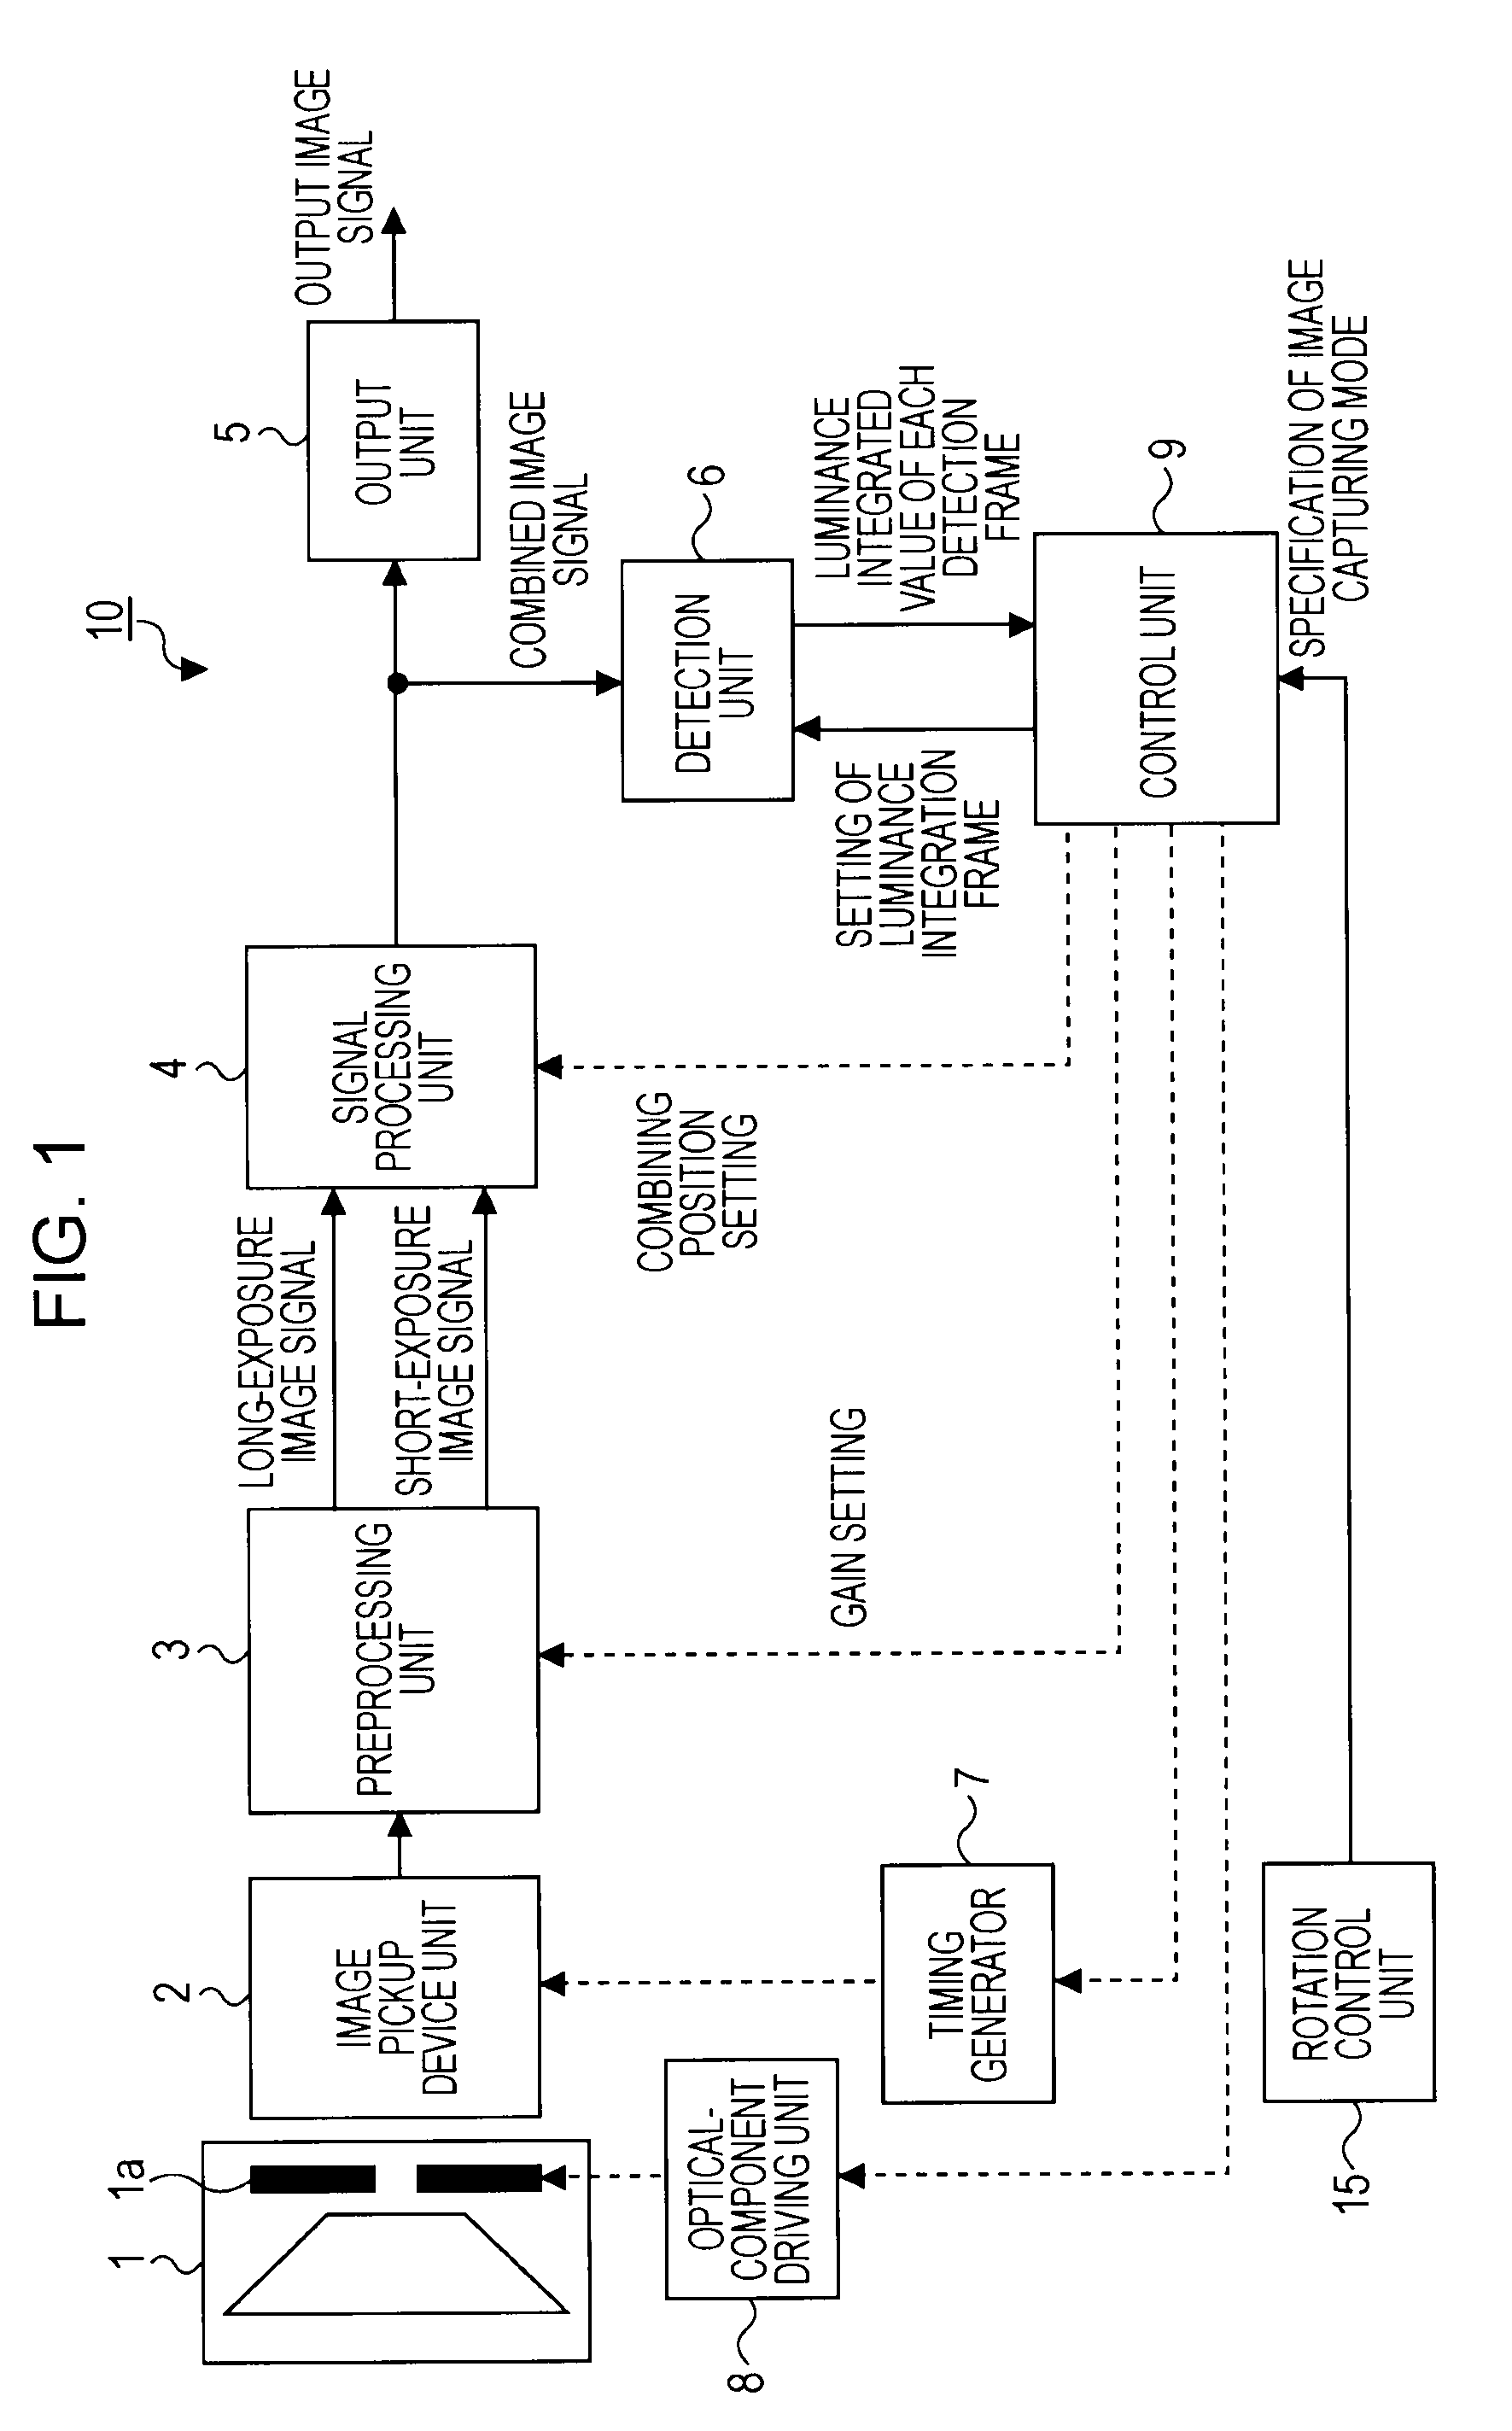 Image pickup apparatus, image pickup method, and program therefor